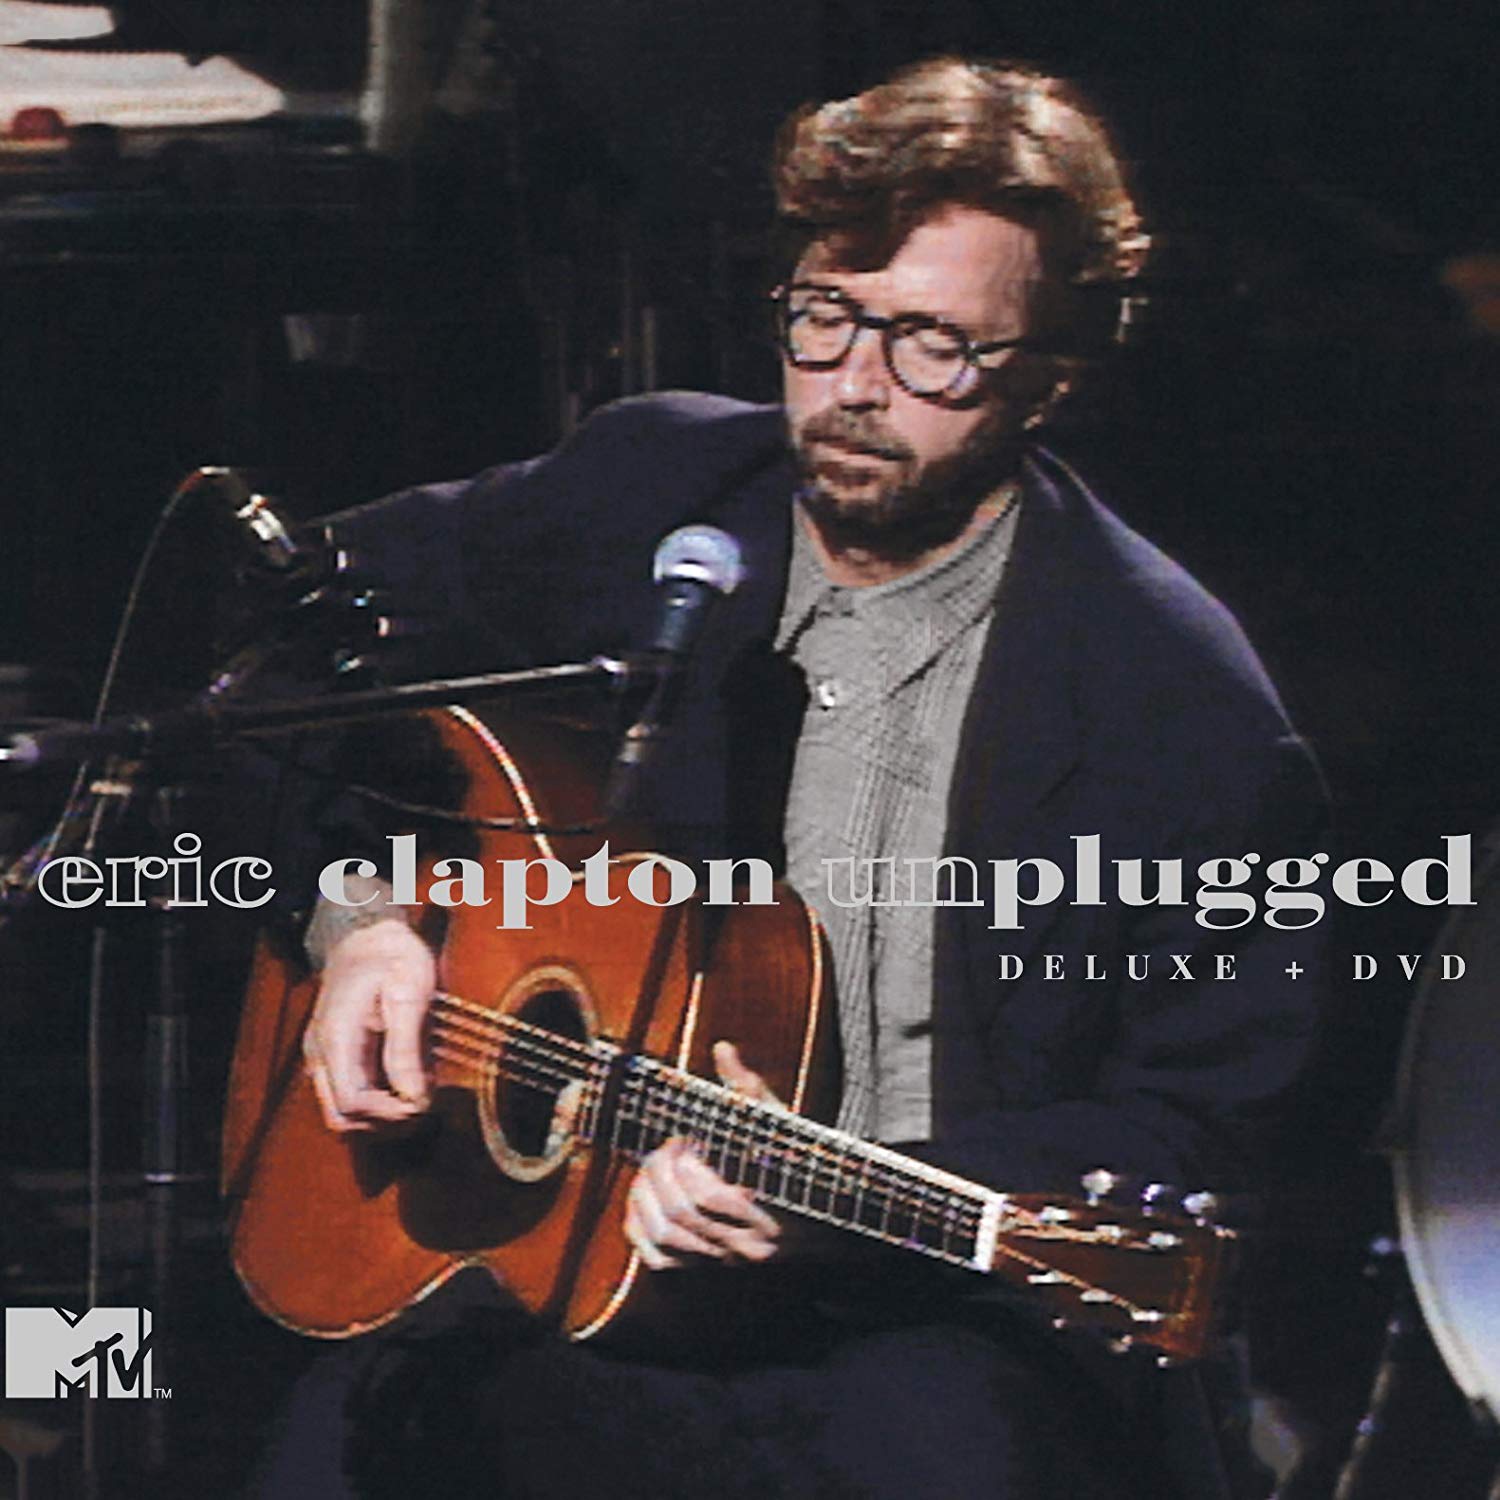 Download Album Ux Band Unplugged